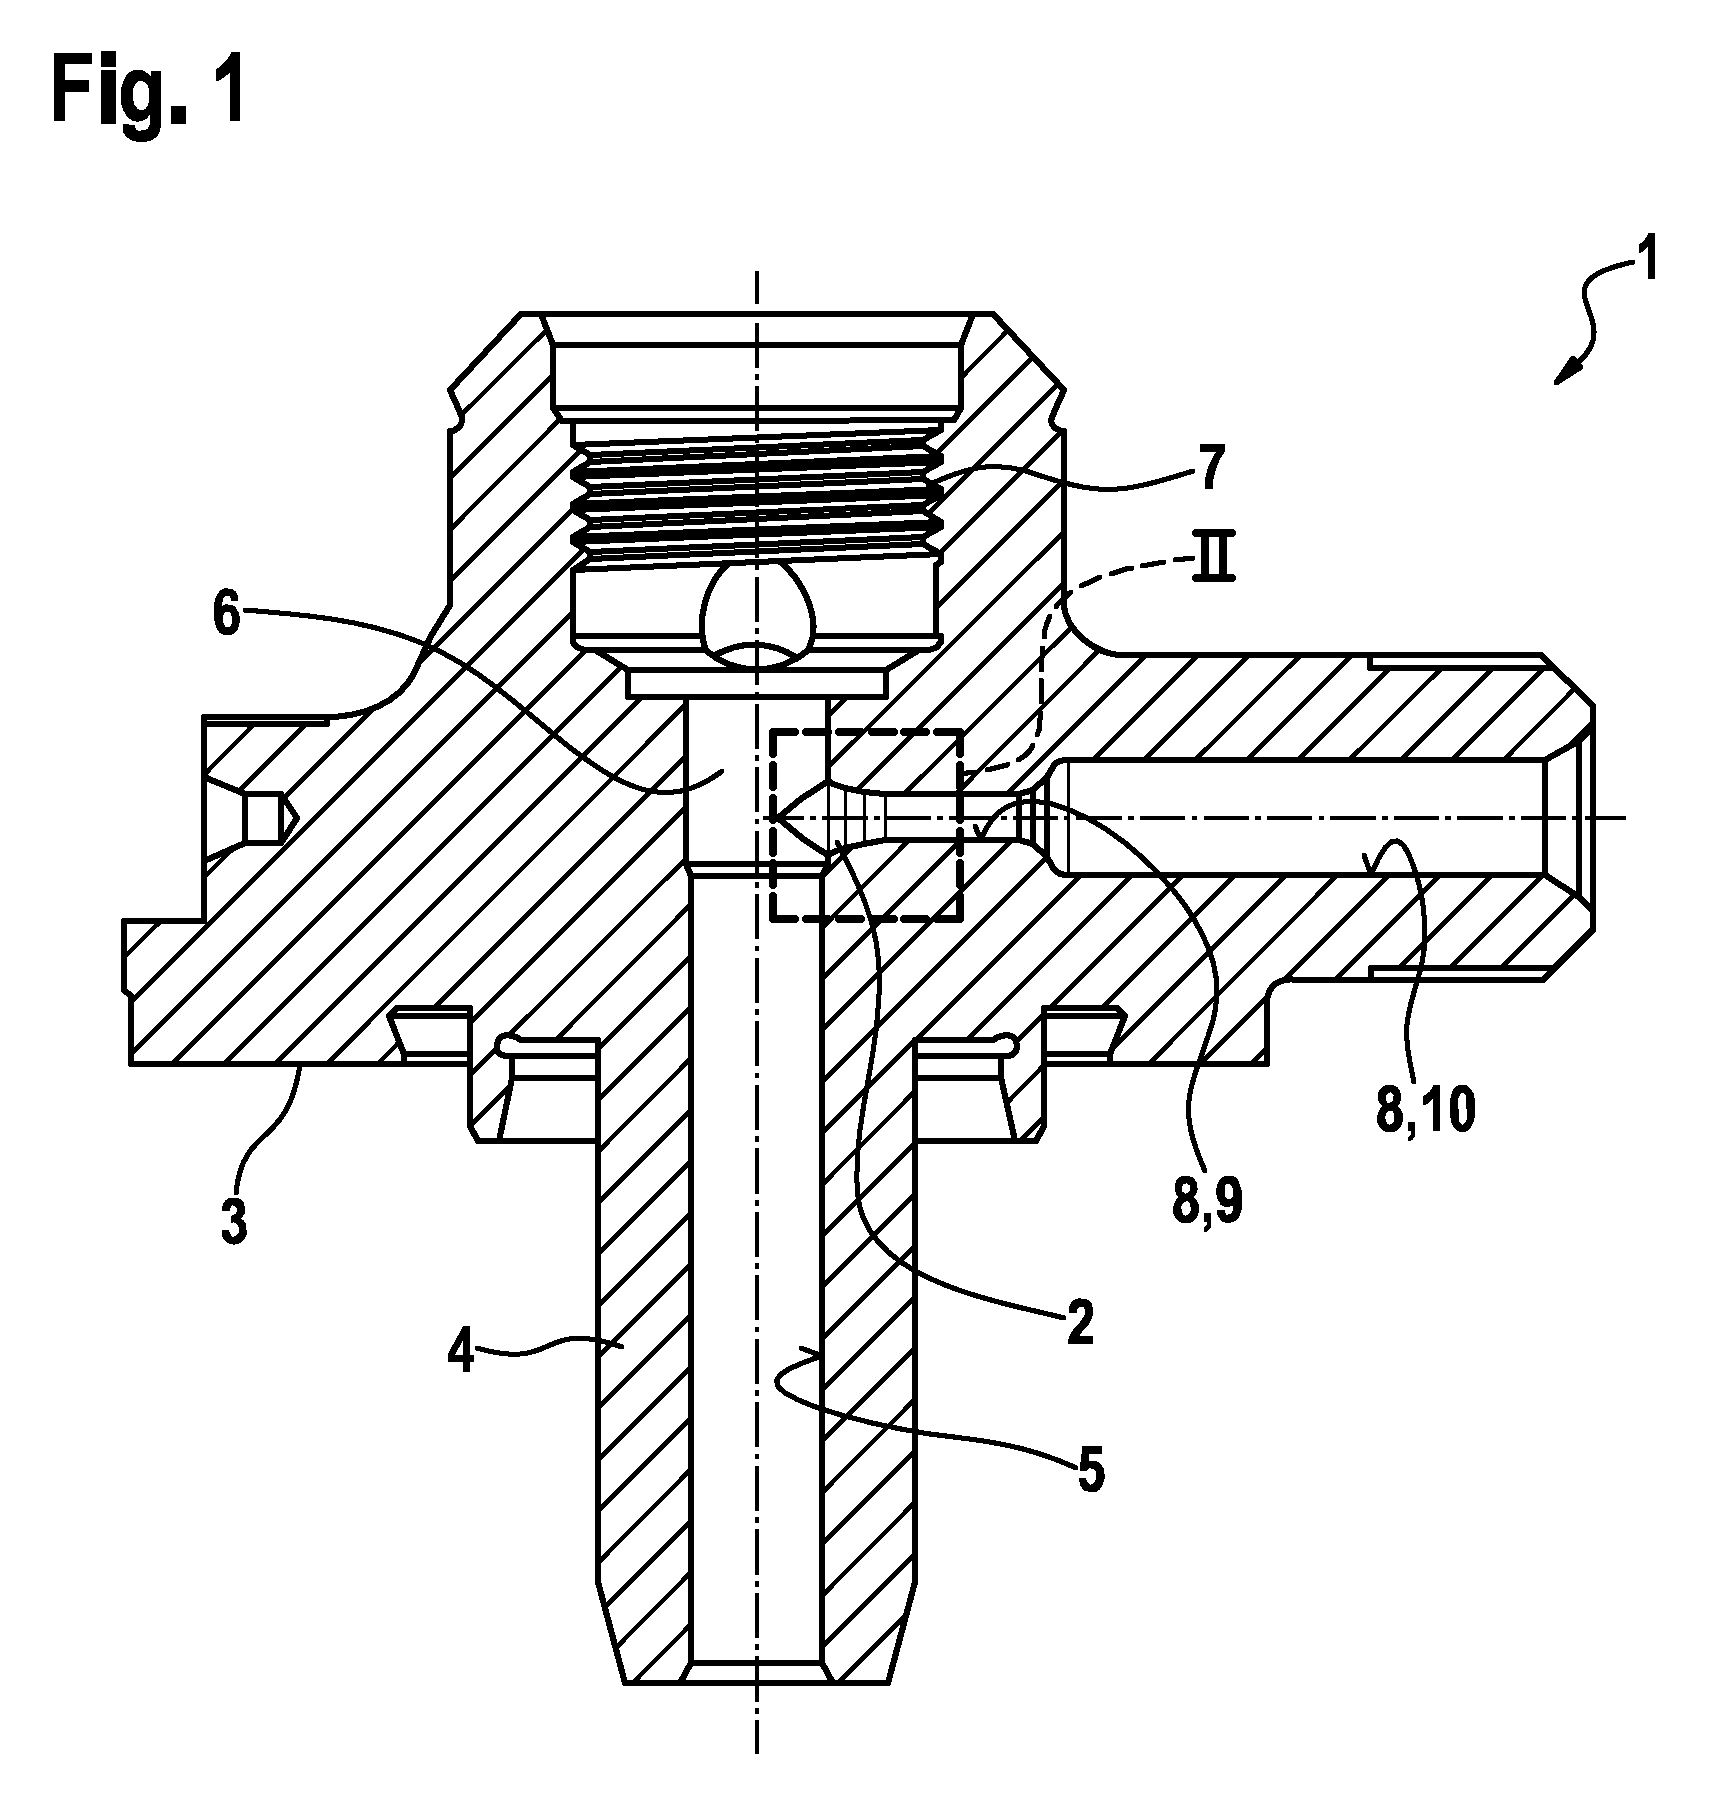 Metallic component for high-pressure applications